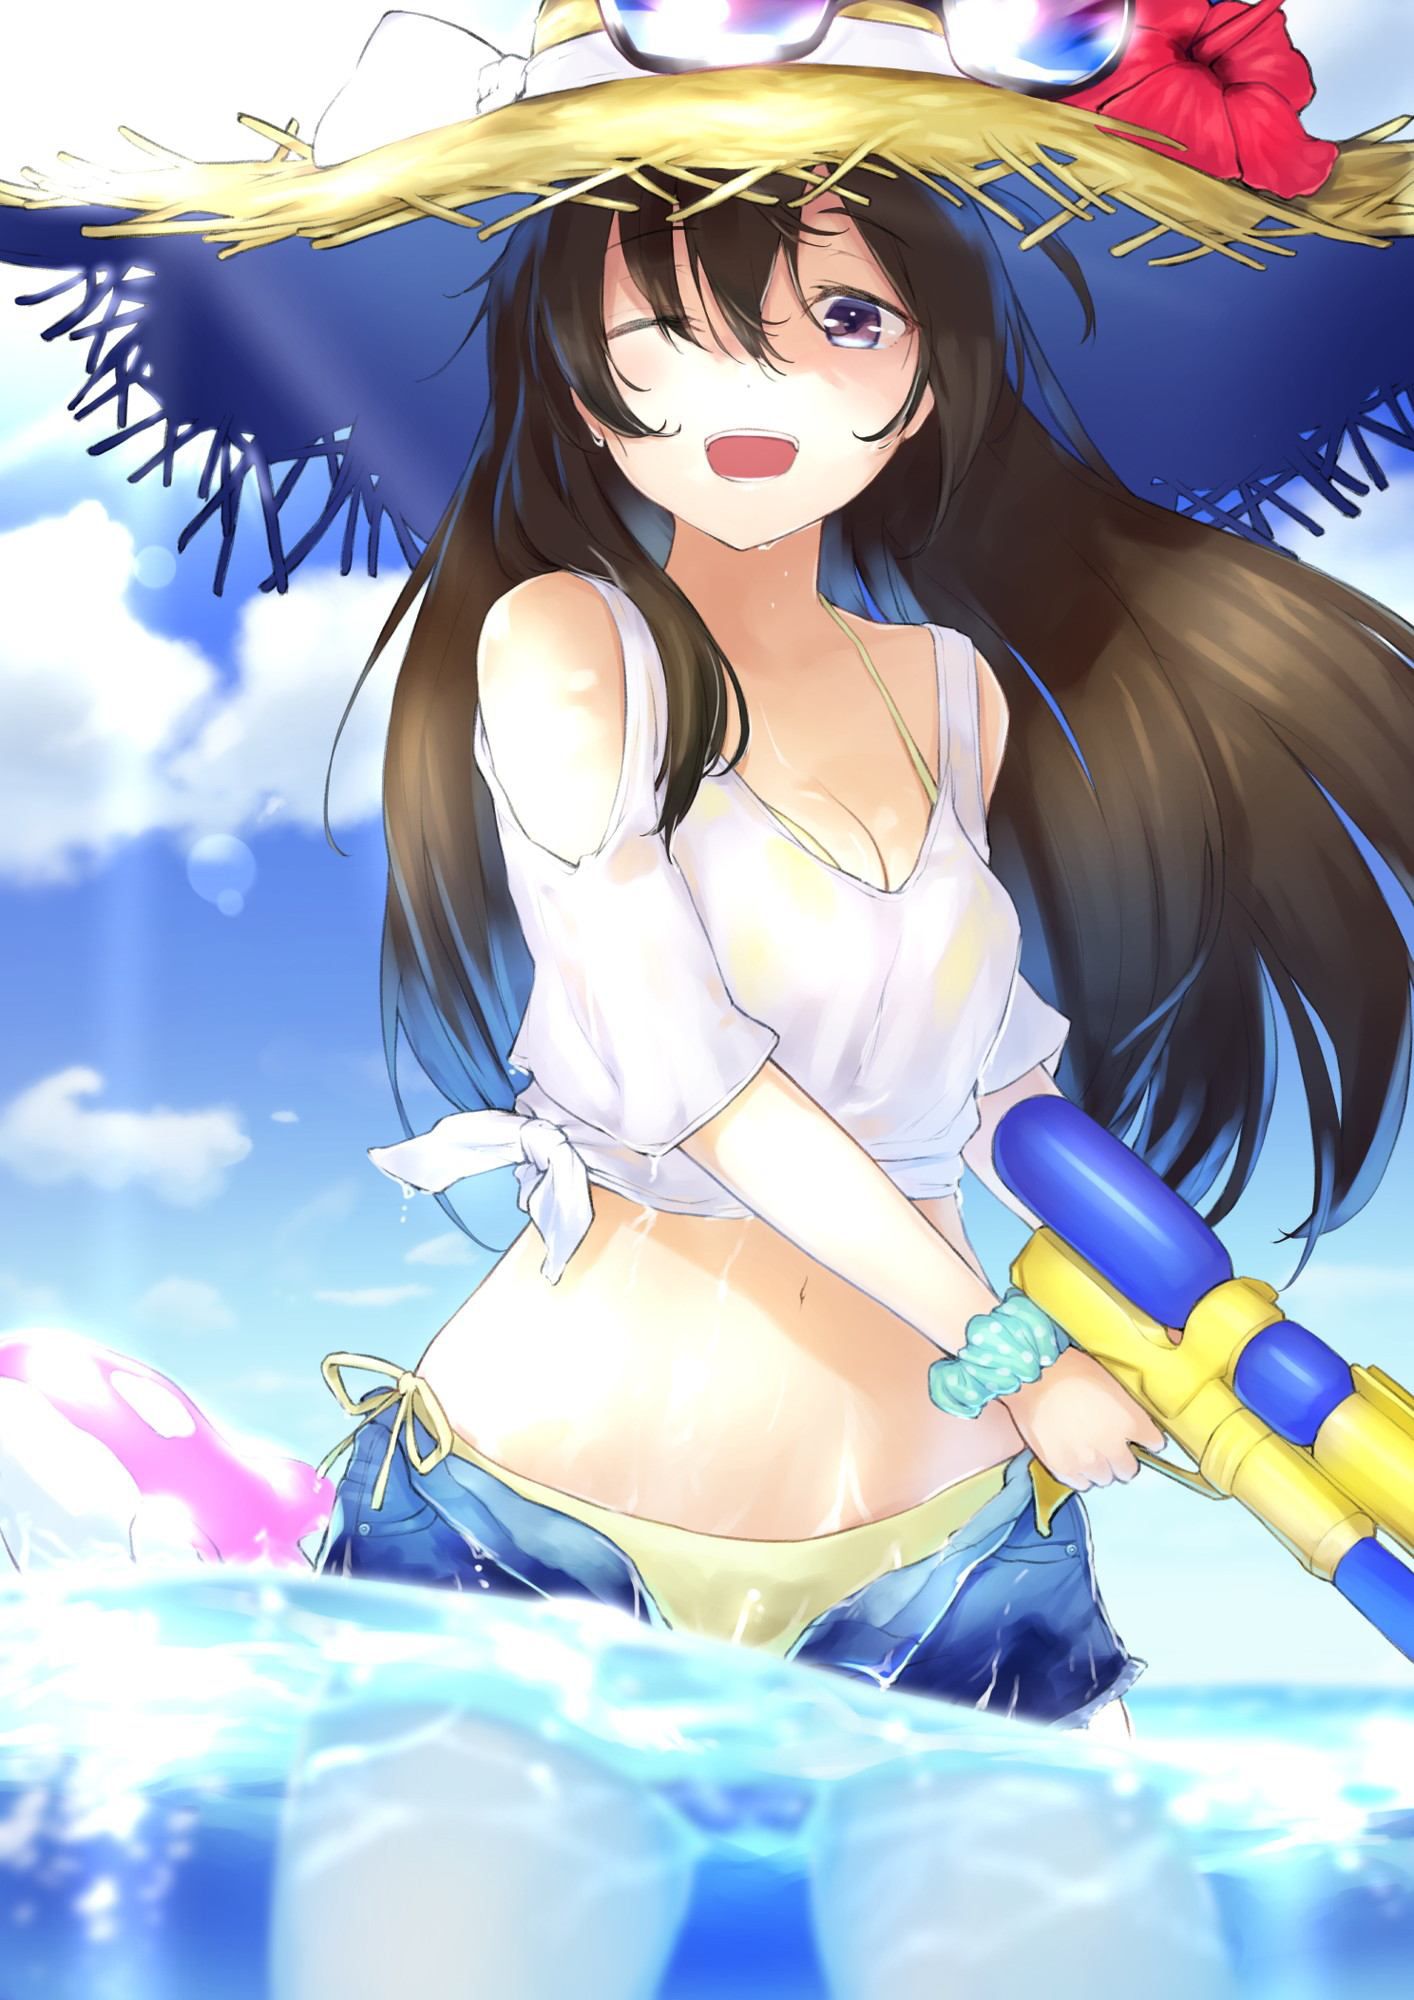 A secondary image to be squeezed in a swimsuit! 6